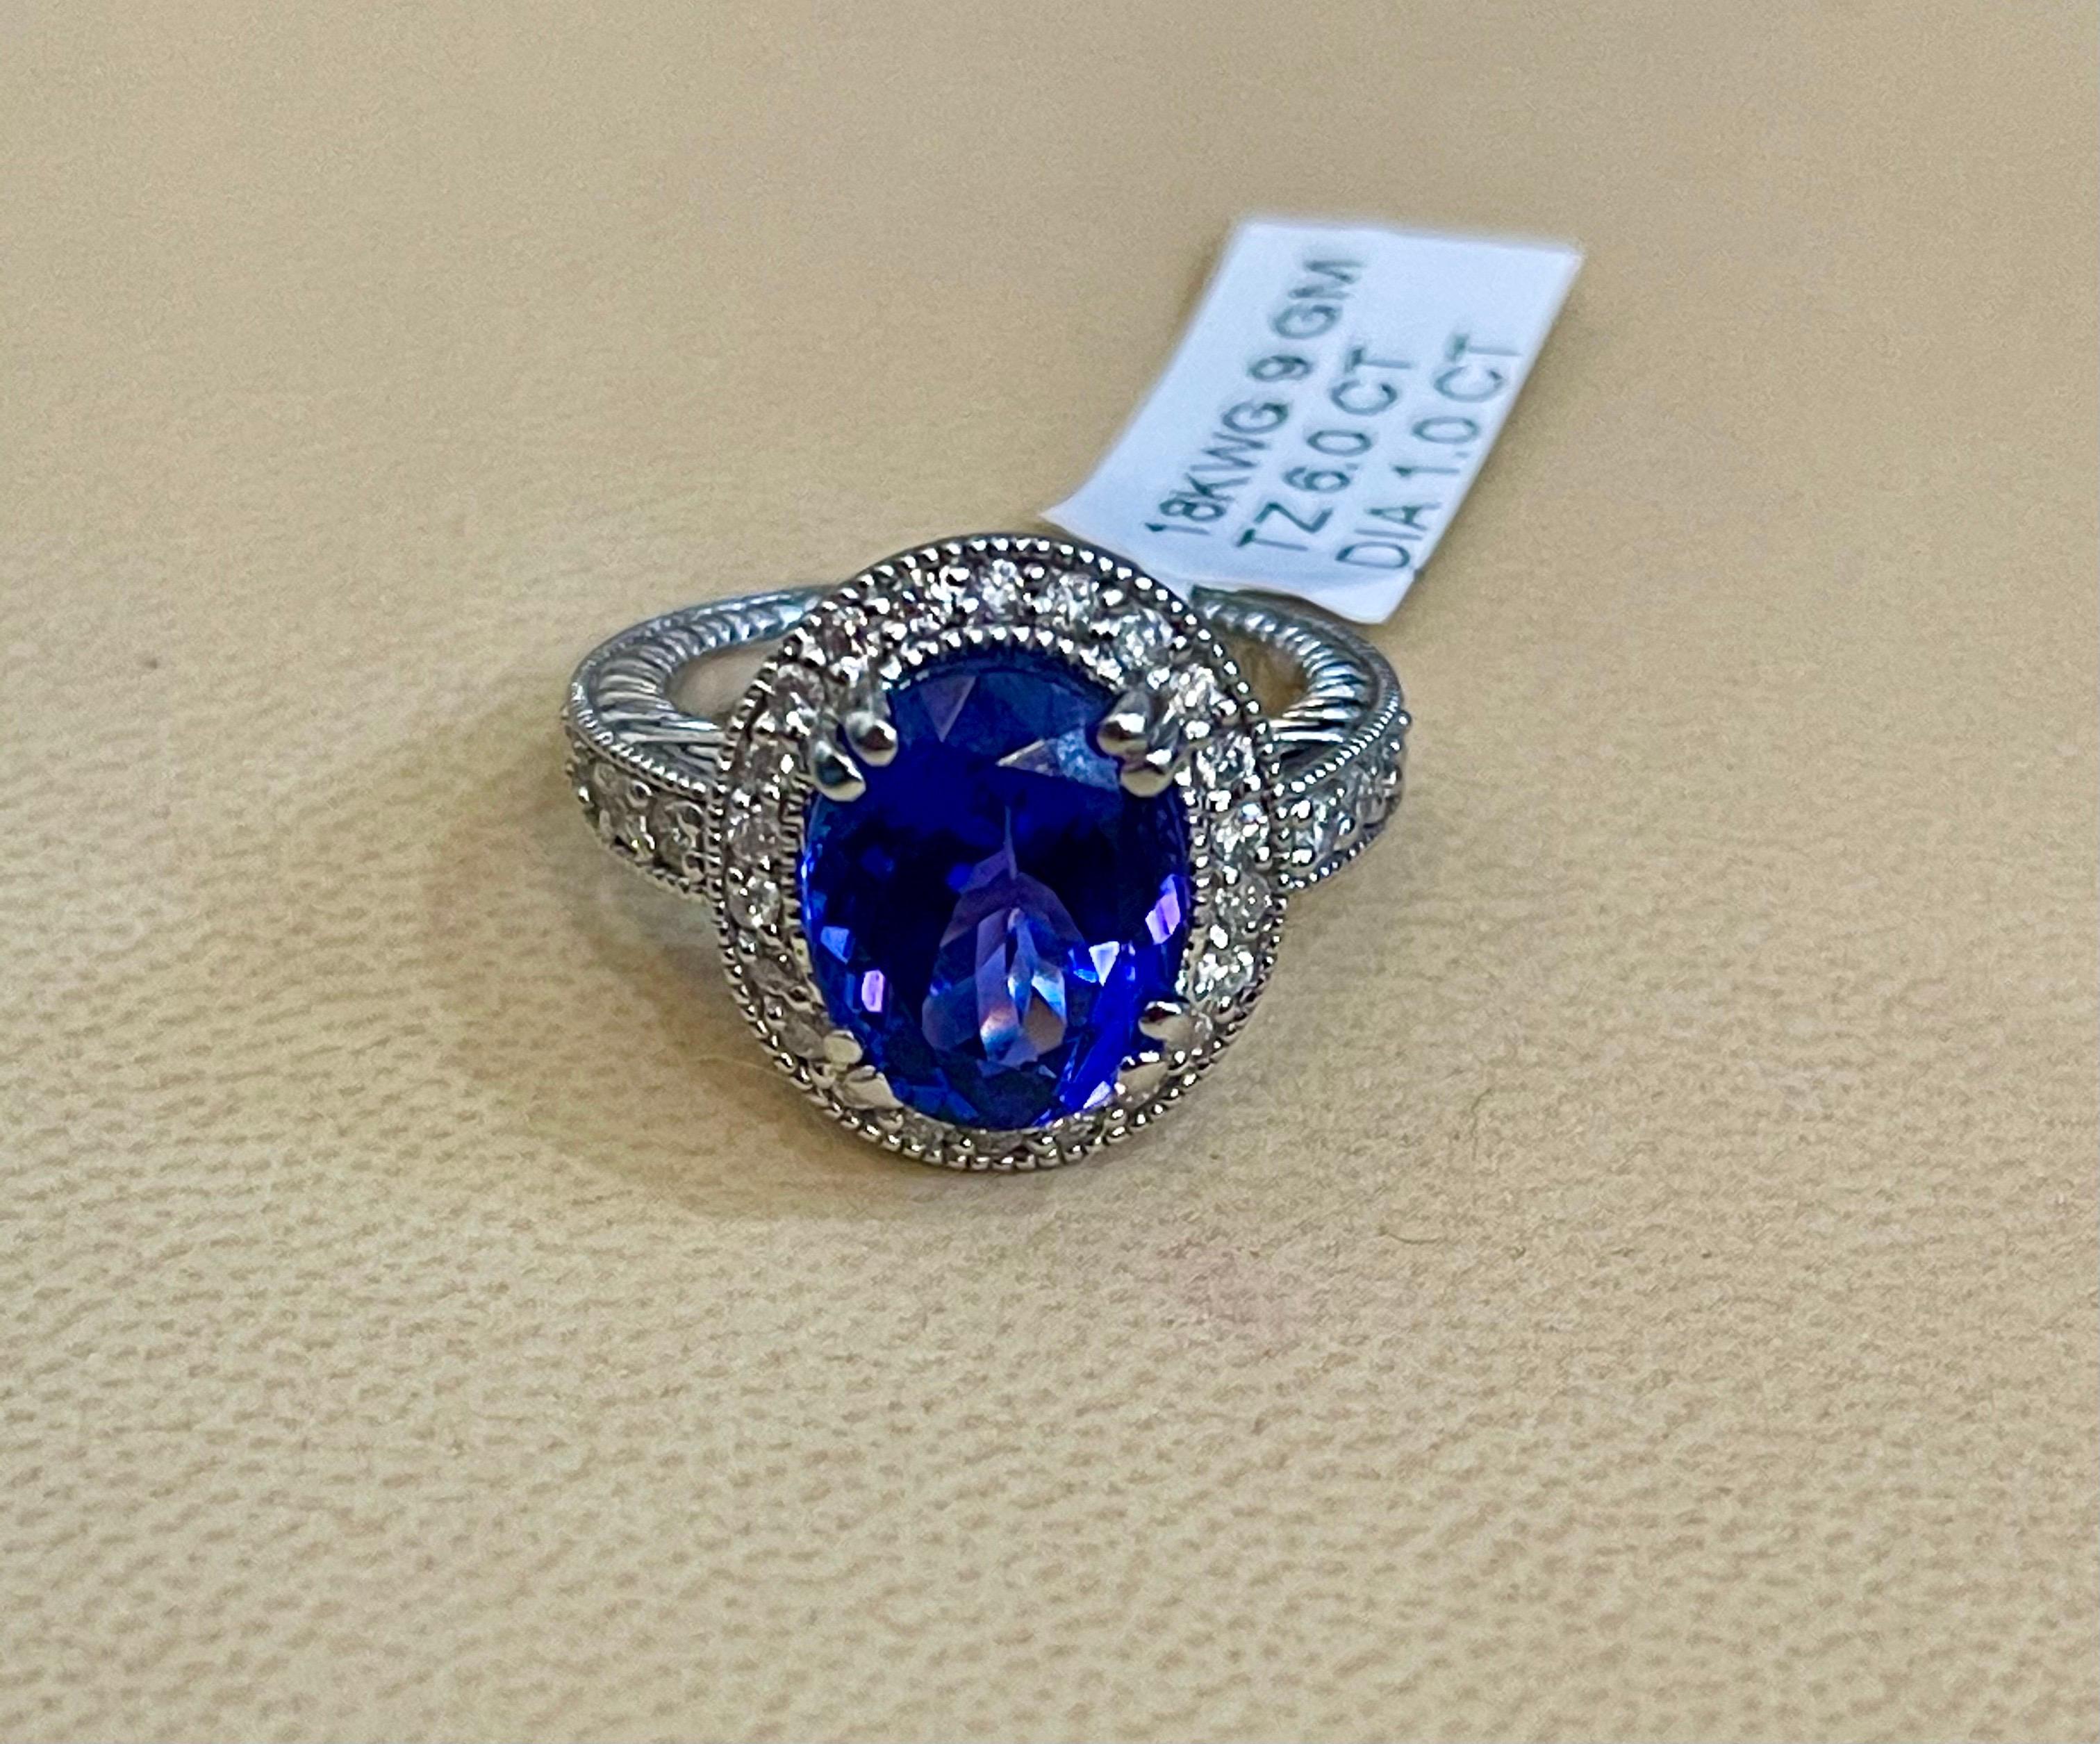 6 Carat Oval Tanzanite and 1 Carat Diamond Ring 14 Karat White Gold, Estate In Excellent Condition For Sale In New York, NY